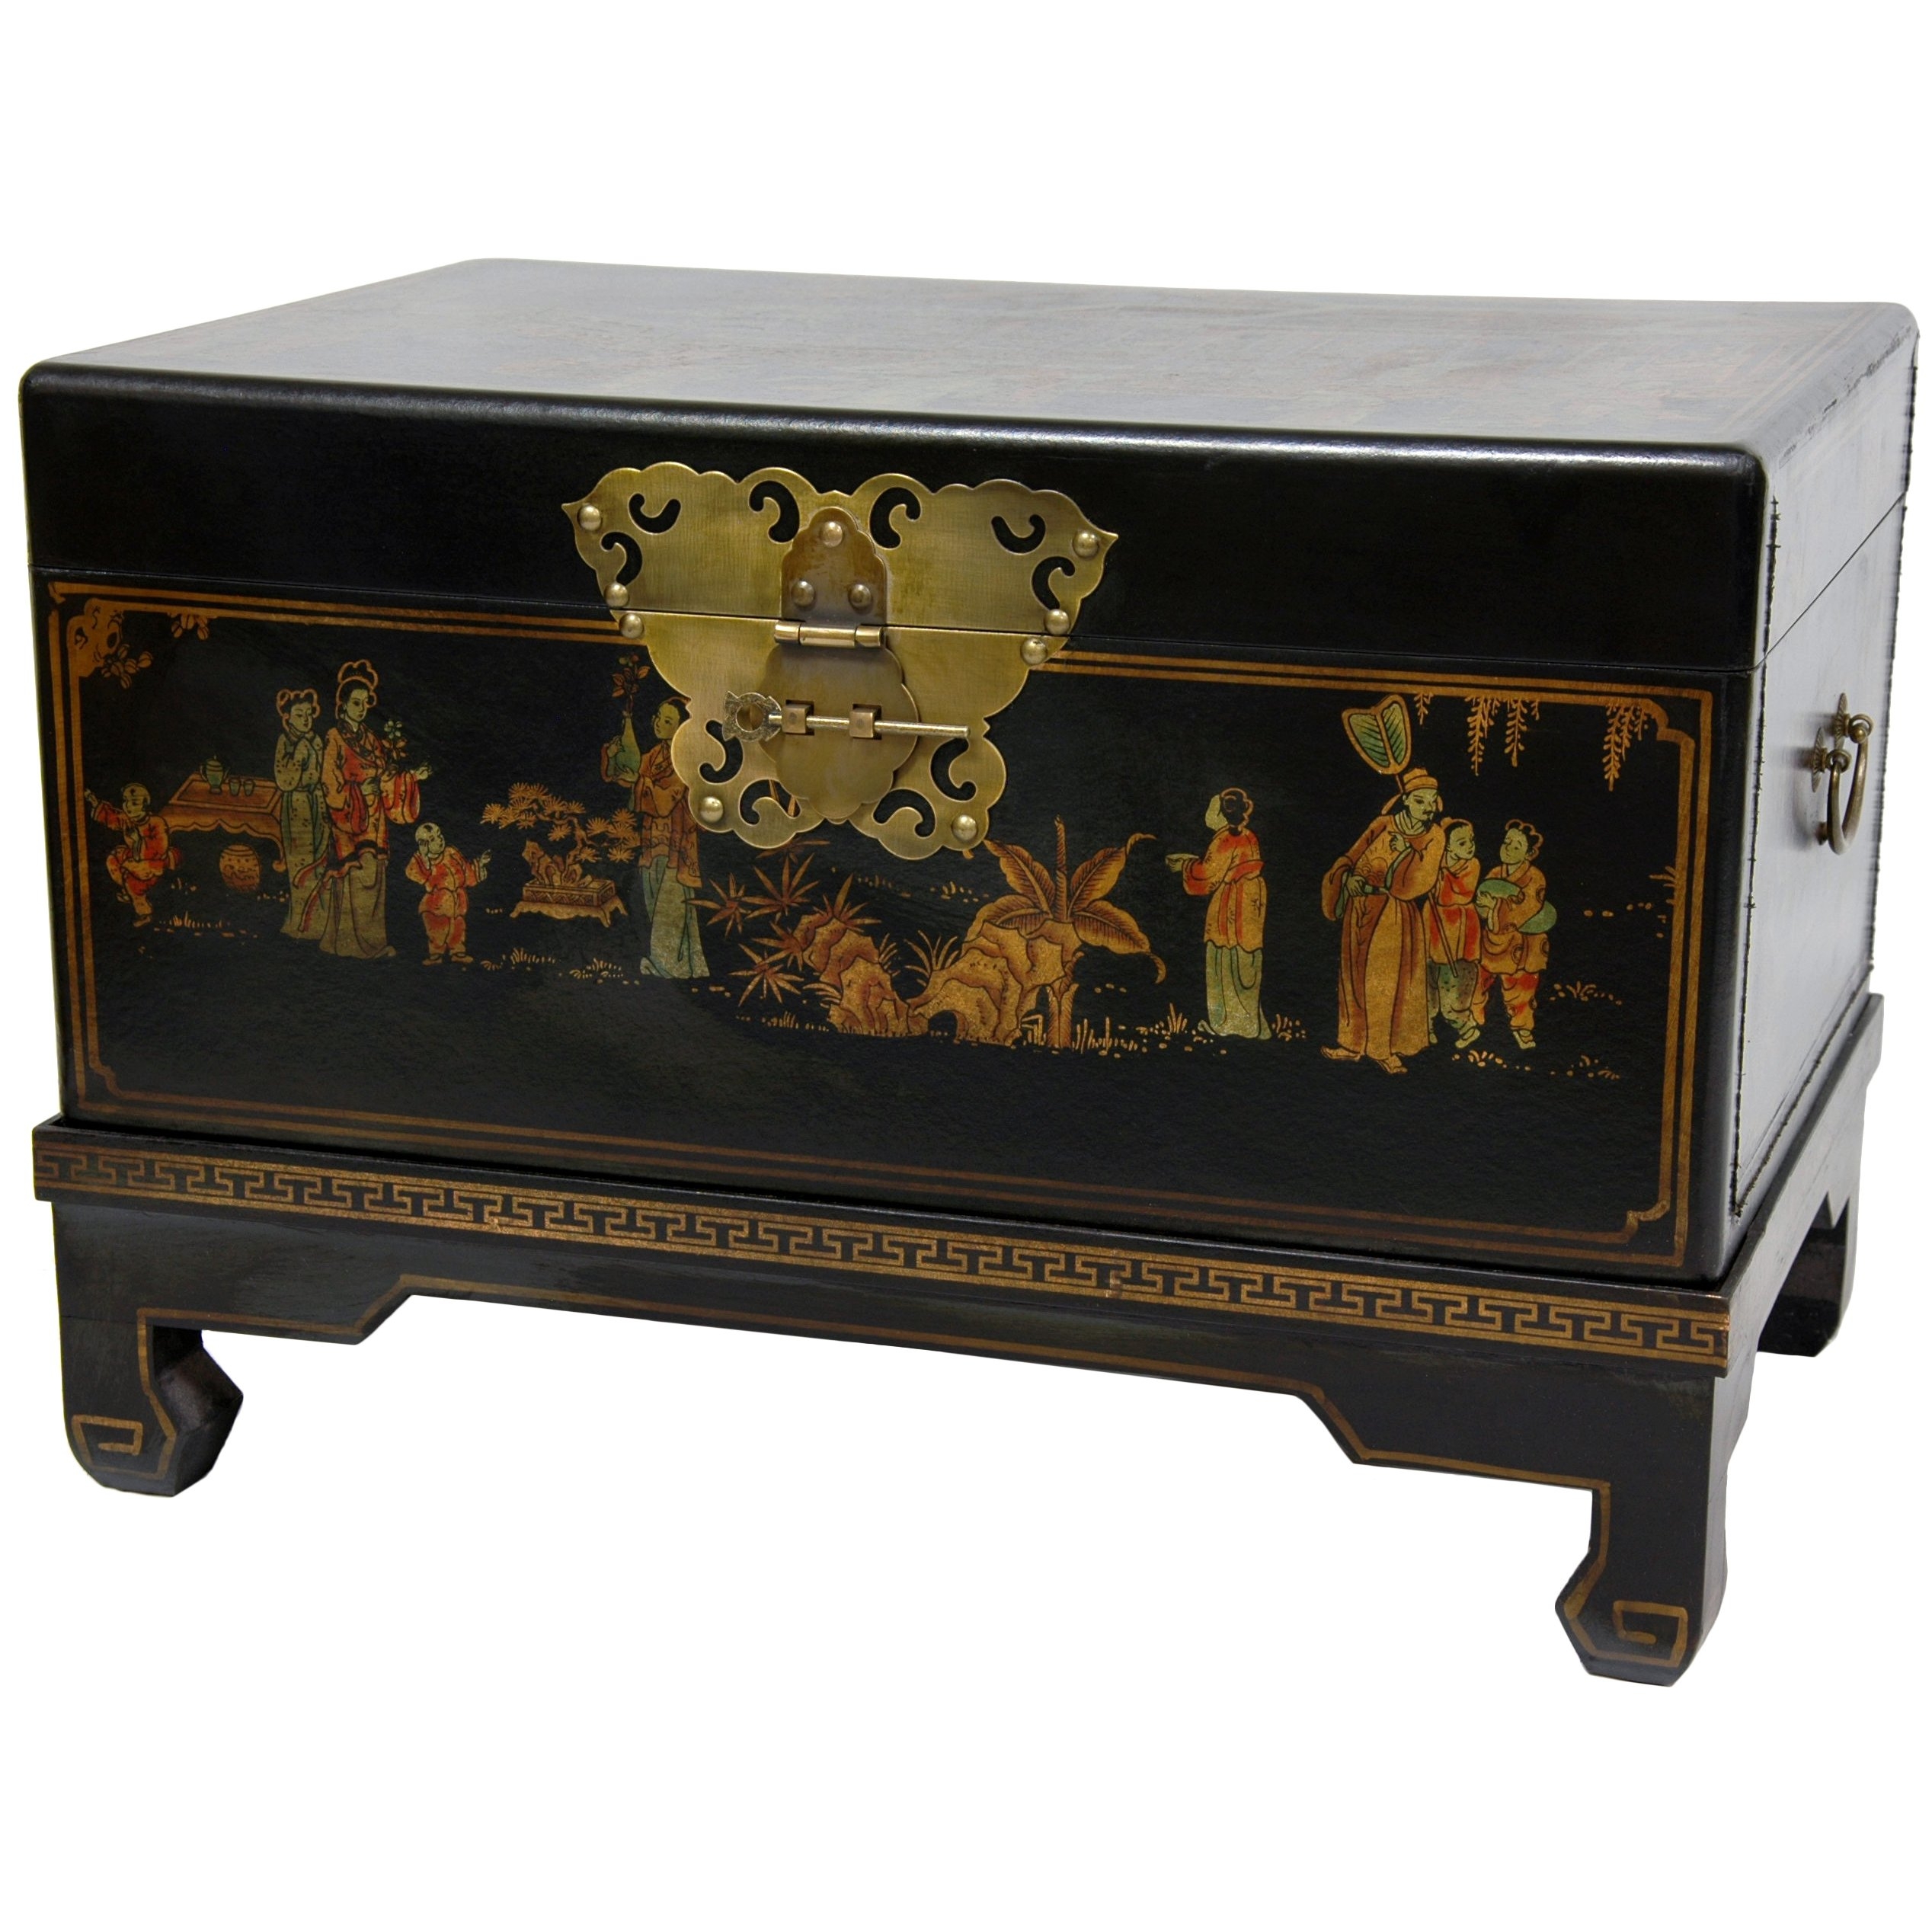 Oriental Furniture Asian Decorative Furnishings, 26-Inch Black Lacquer Small Trunk Oriental Hope Chest